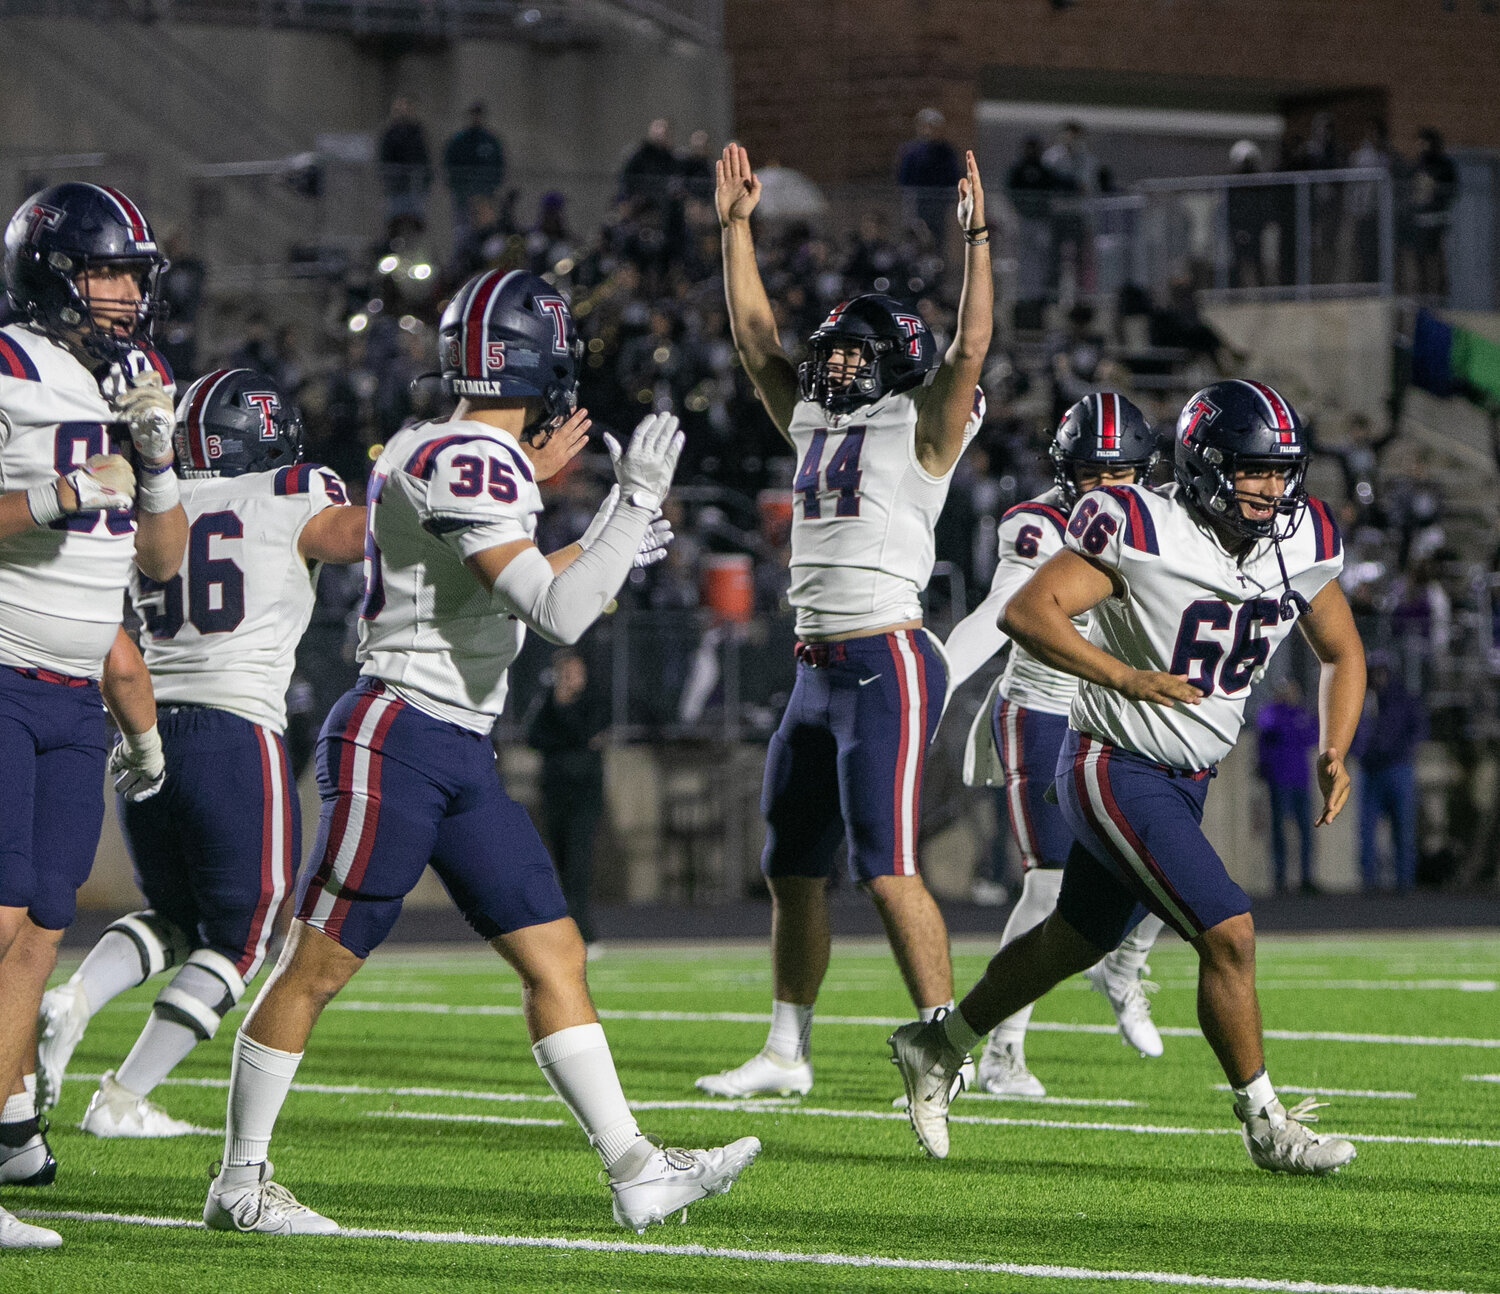 William Duncan celebrates after kicking a 41-yard field goal during Friday's game between Tompkins and Ridge Point at Hall Stadium.